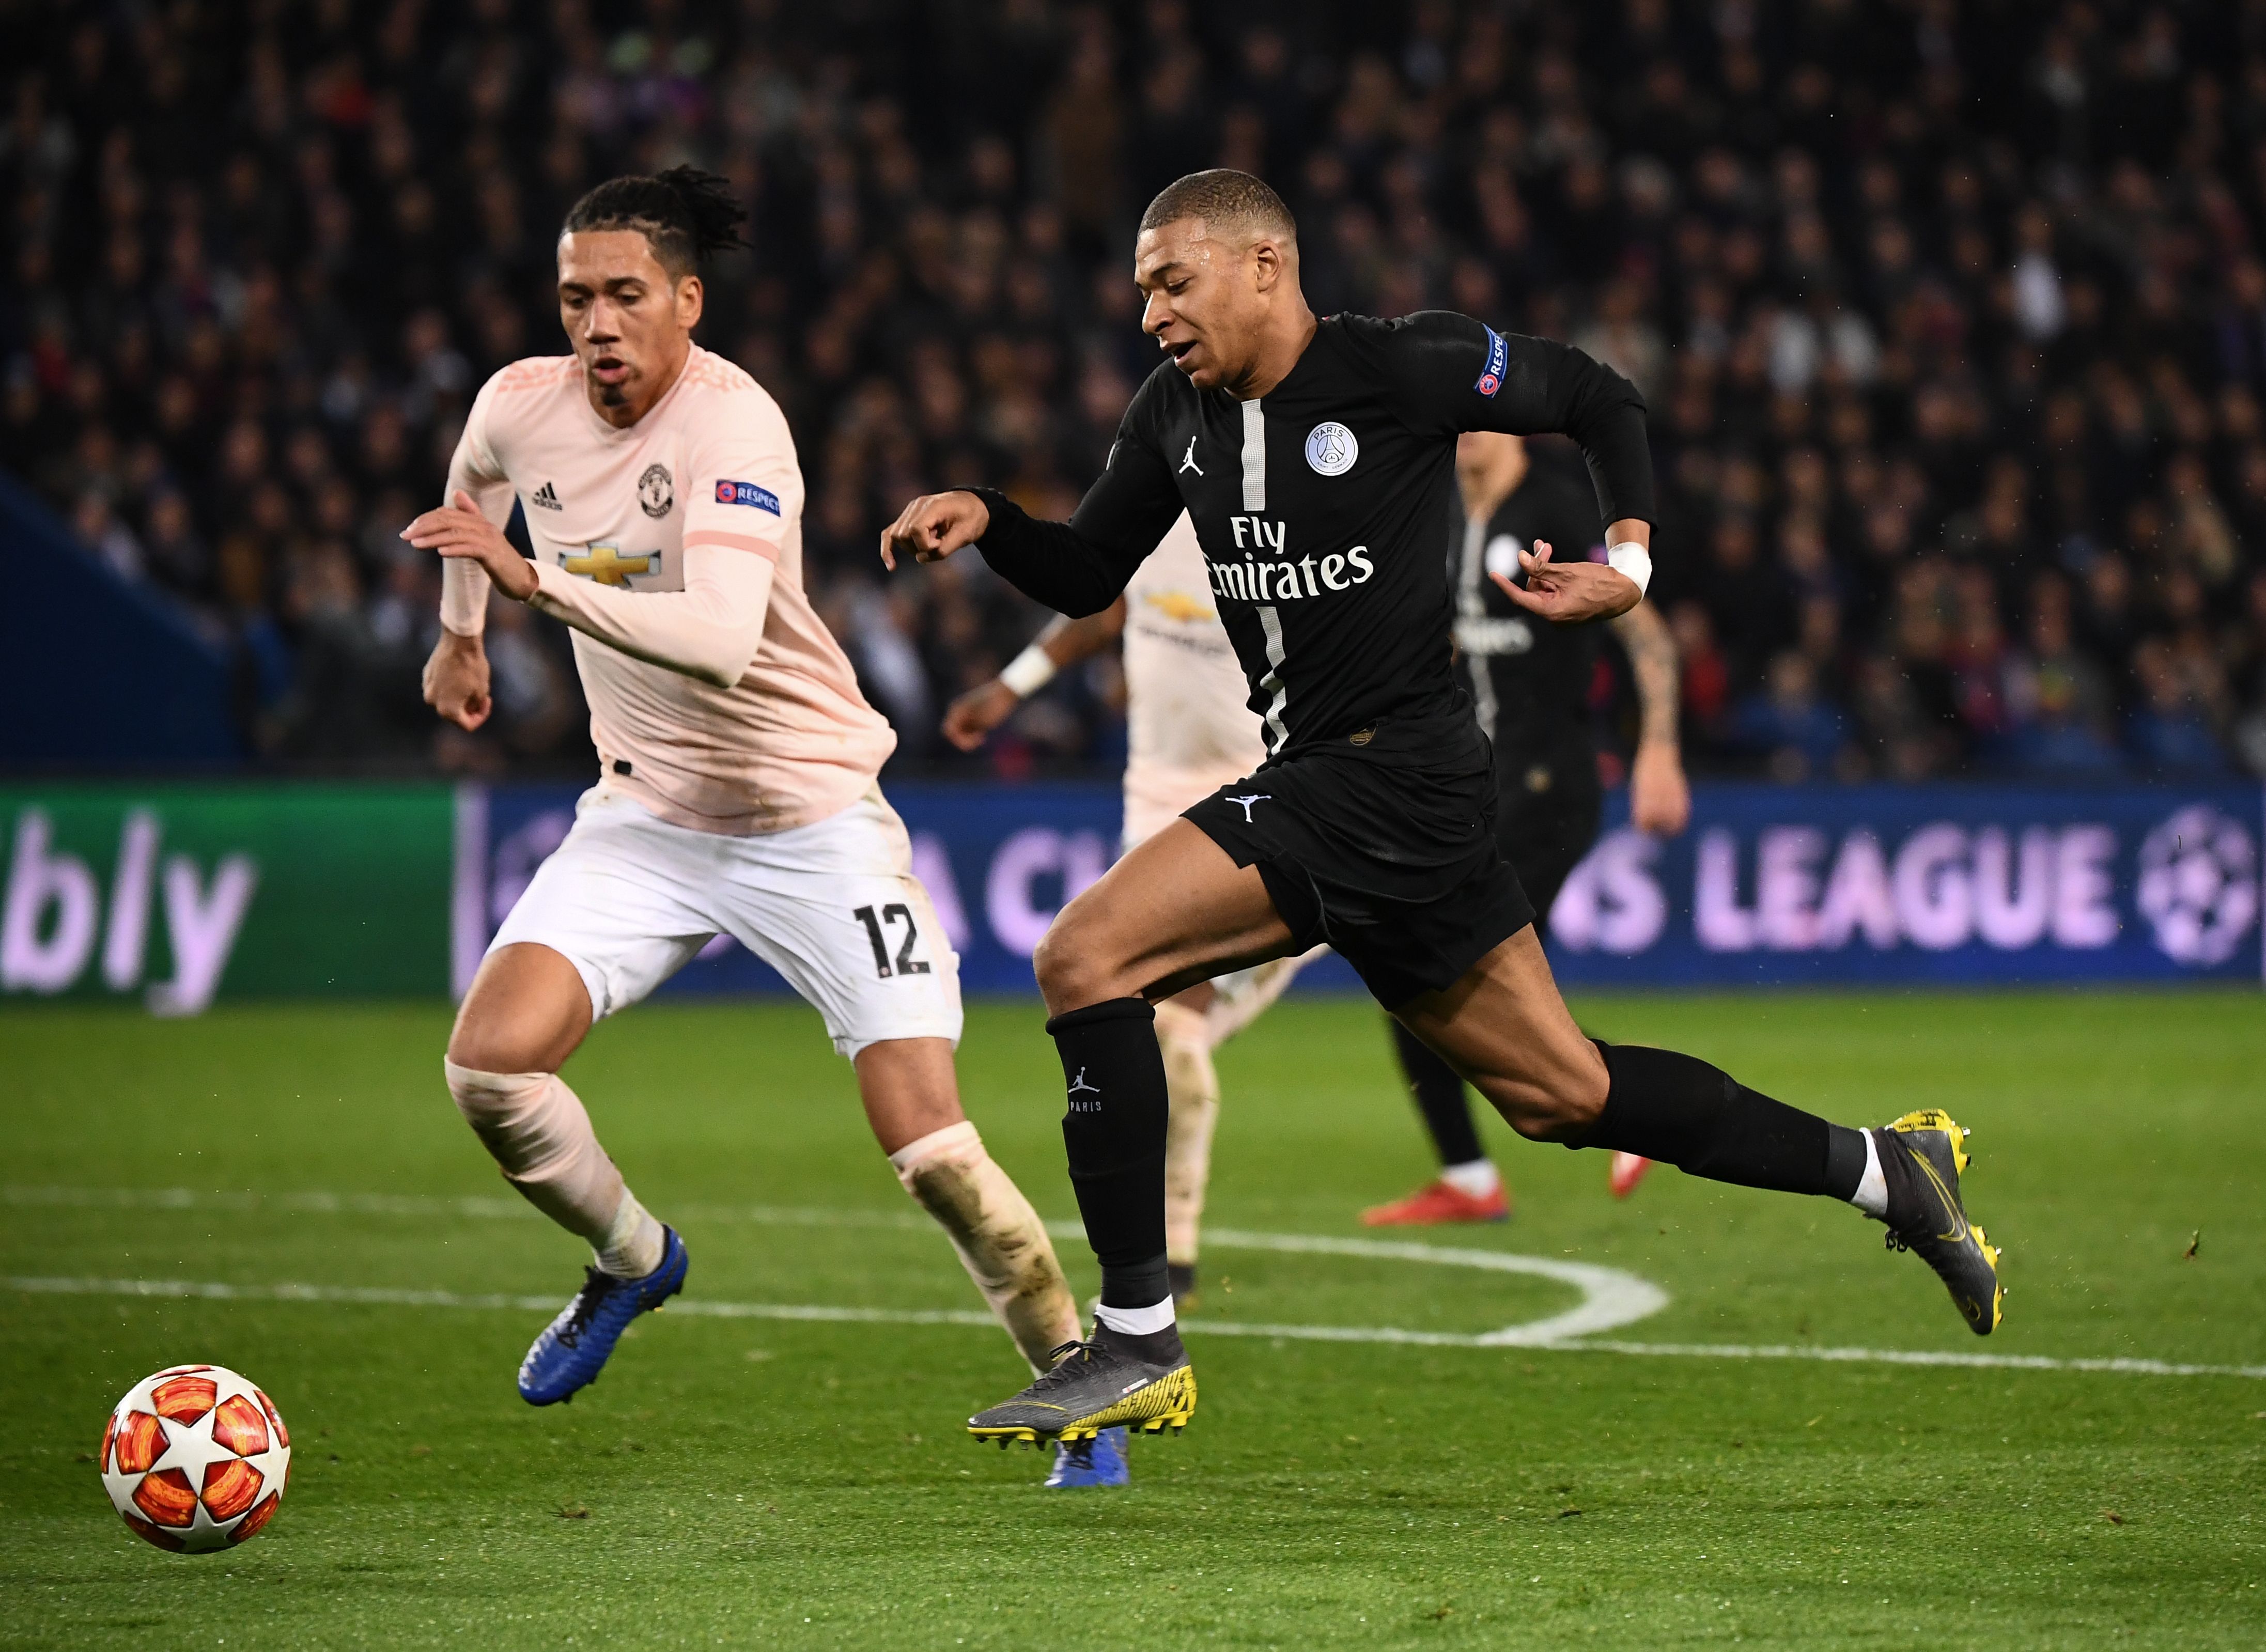 Smalling was brave against the threat of Kylian Mbappe. (Photo by Franck Fife/AFP/Getty Images)